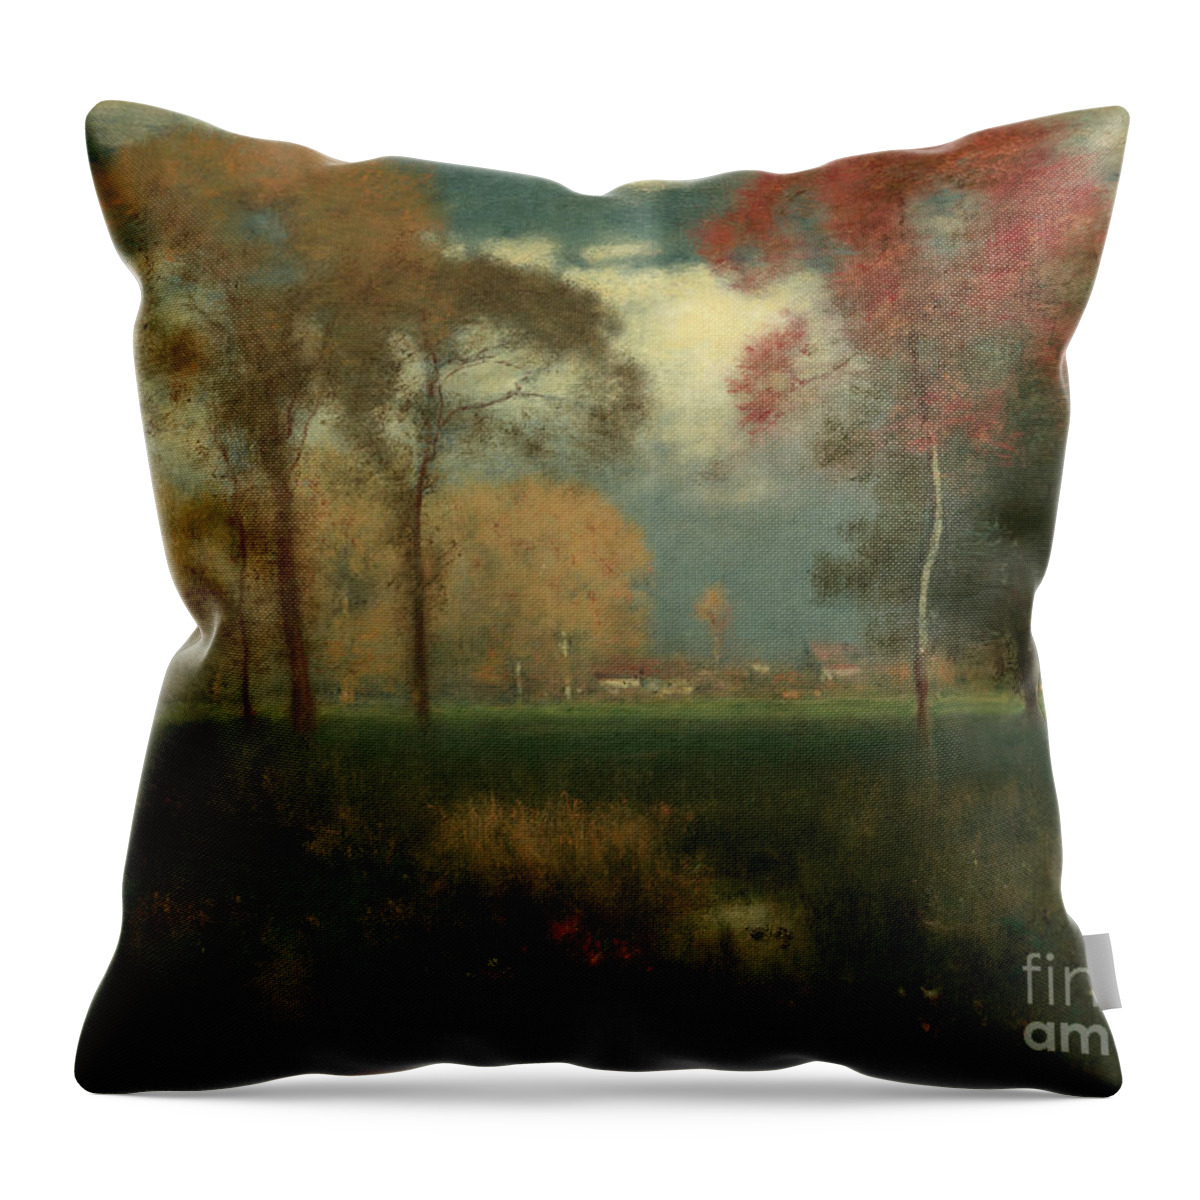 Sunny Throw Pillow featuring the painting Sunny Autumn Day, 1892 by George Inness Snr